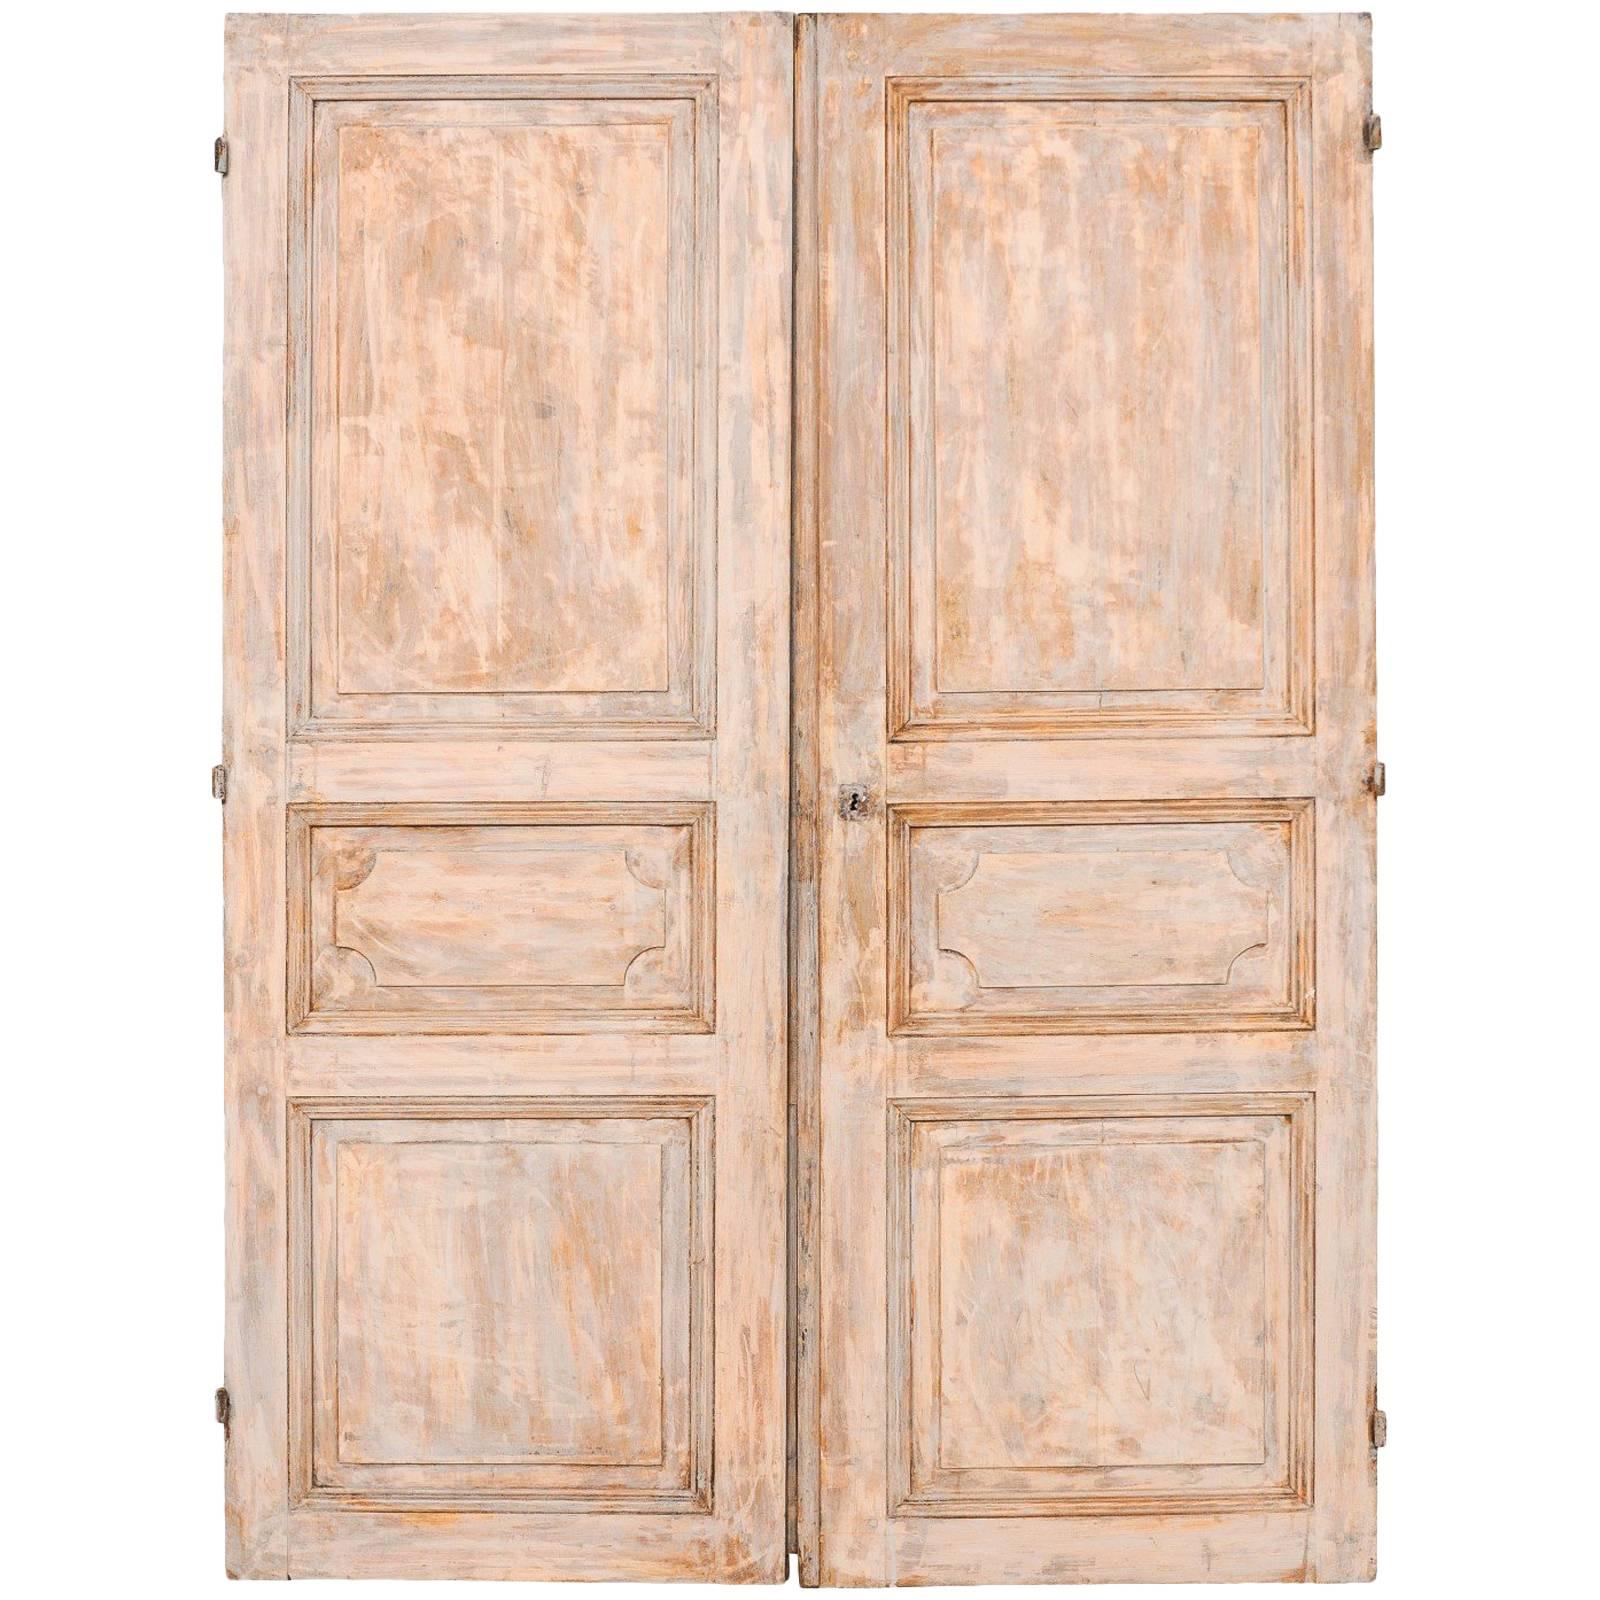 Pair of European, French Style 19th Century Doors with Shades of Taupe and Grey